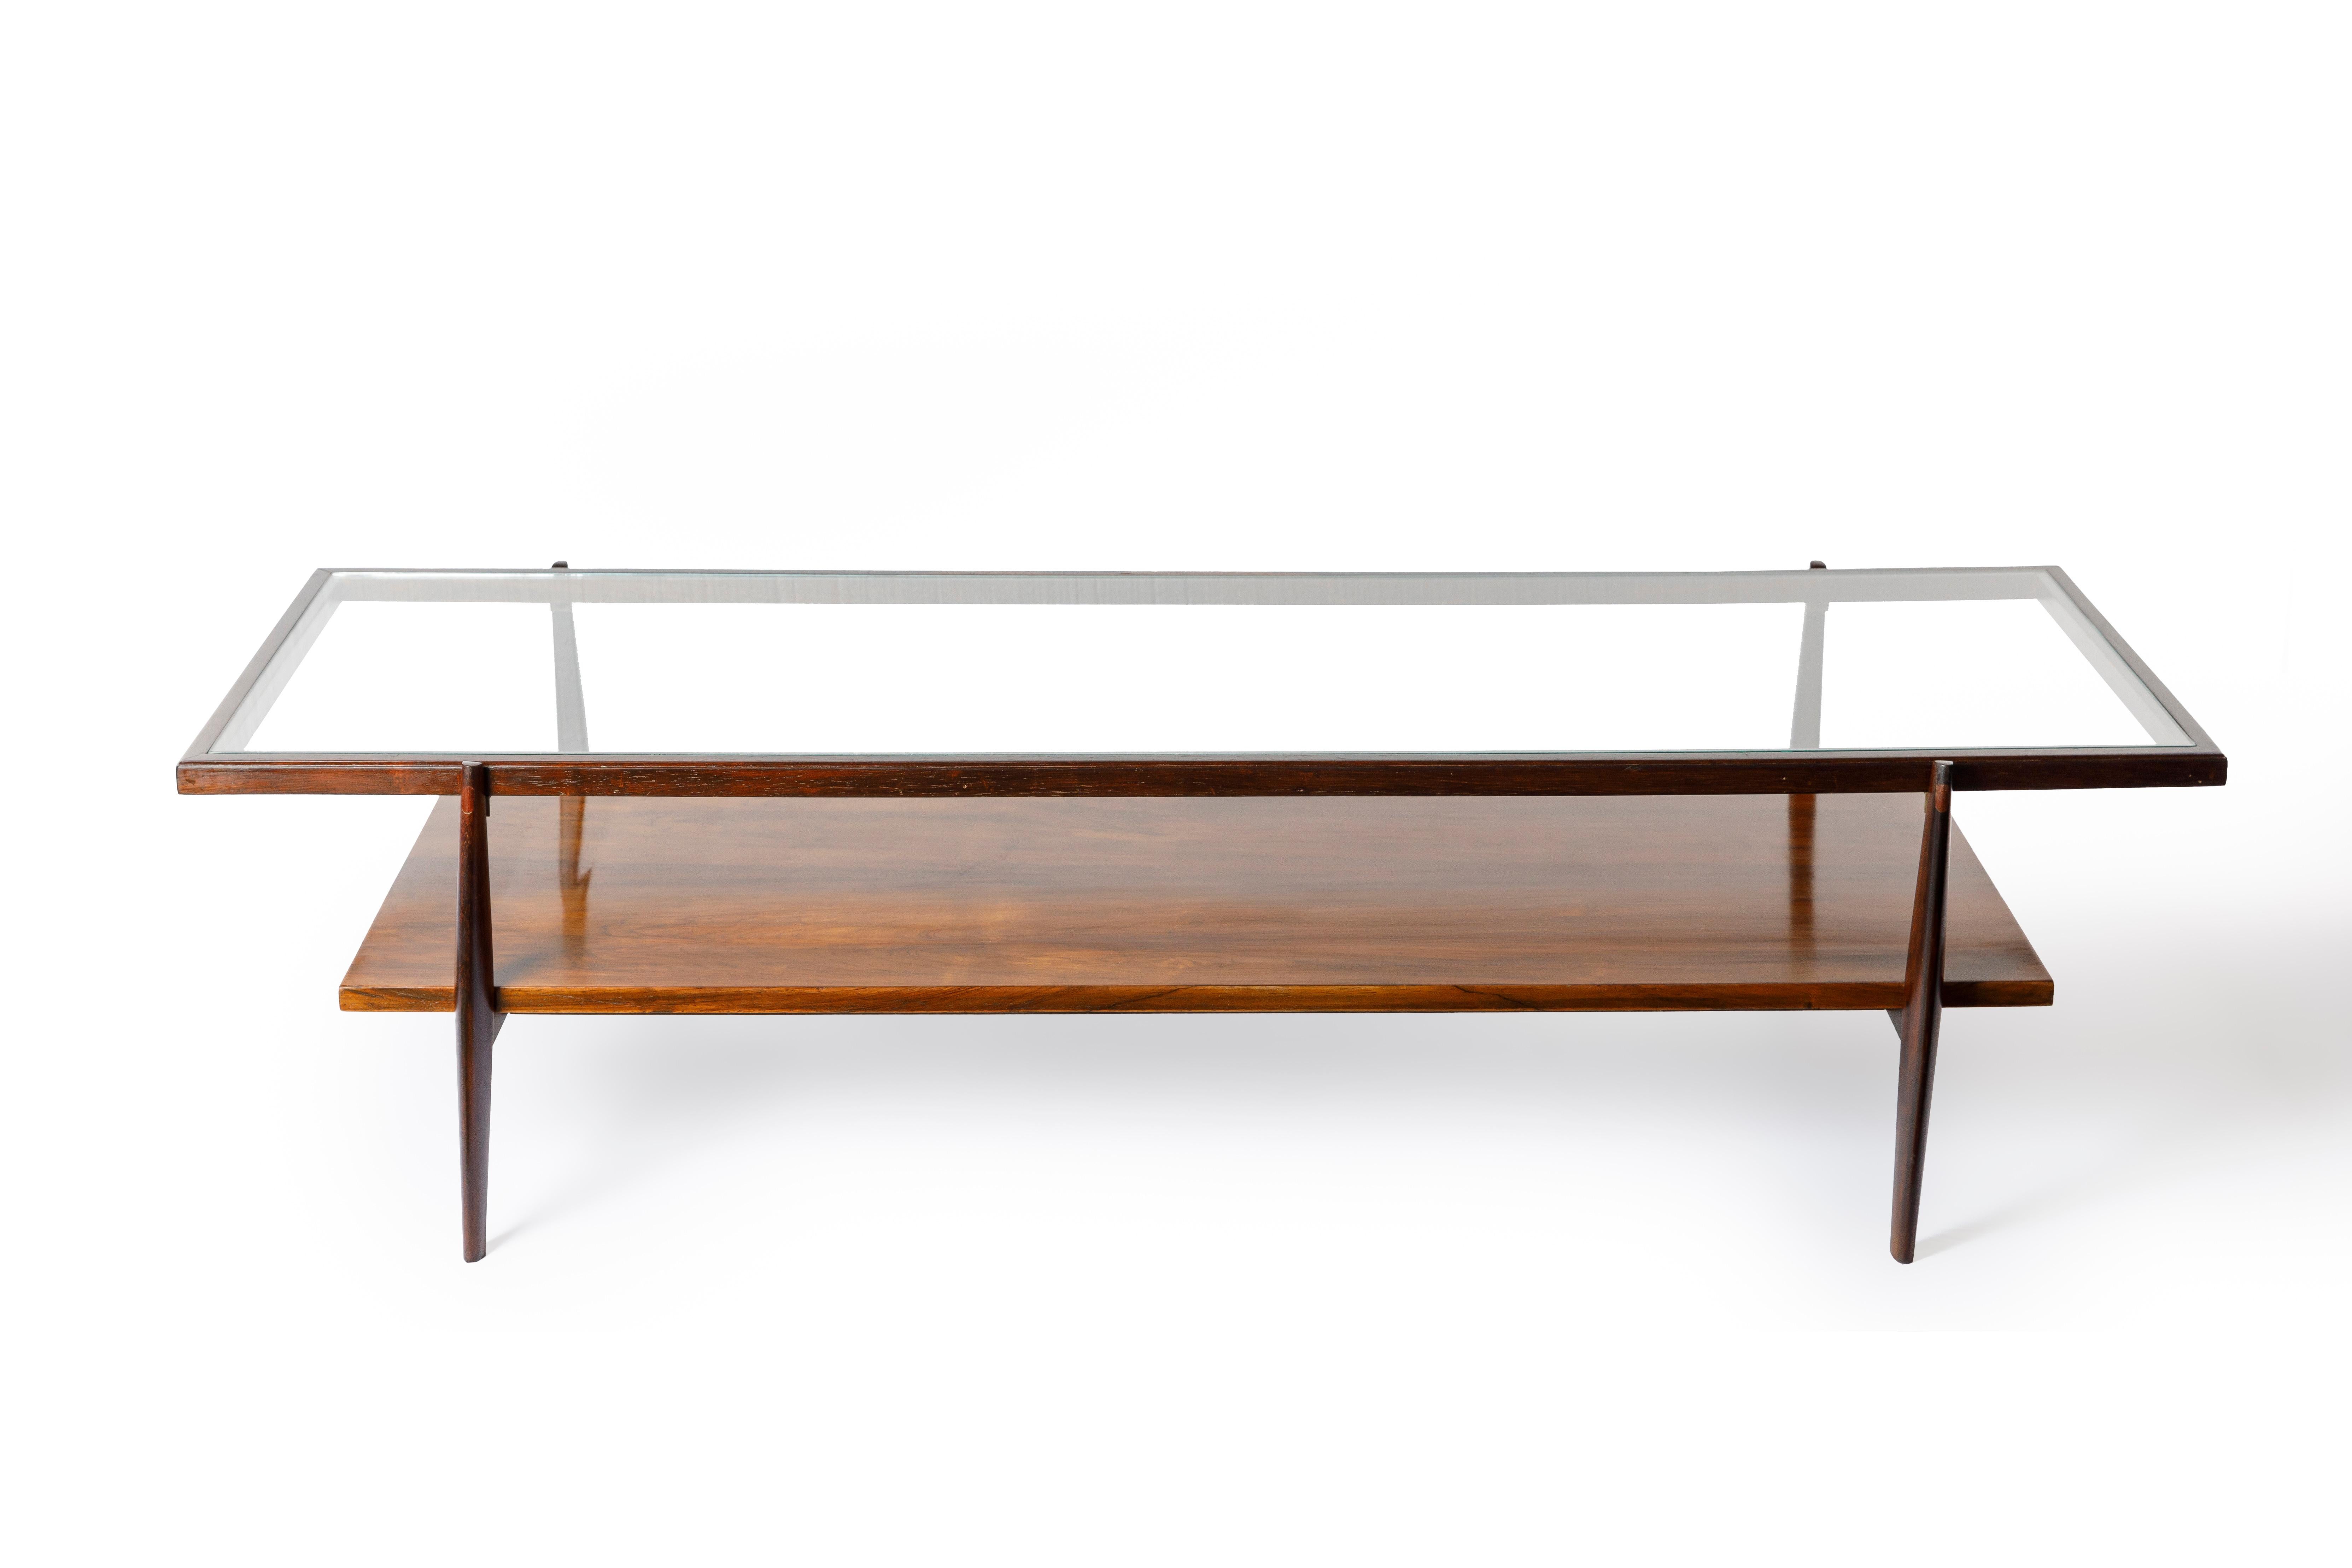 Elegant Mid-Century Modern coffee table manufactured in the 1950s by Liceu de Artes e Ofícios. Structured in solid Brazilian hardwood with a nestled glass top, this piece features turned legs and a single low shelf in veneered hardwood, perfect for